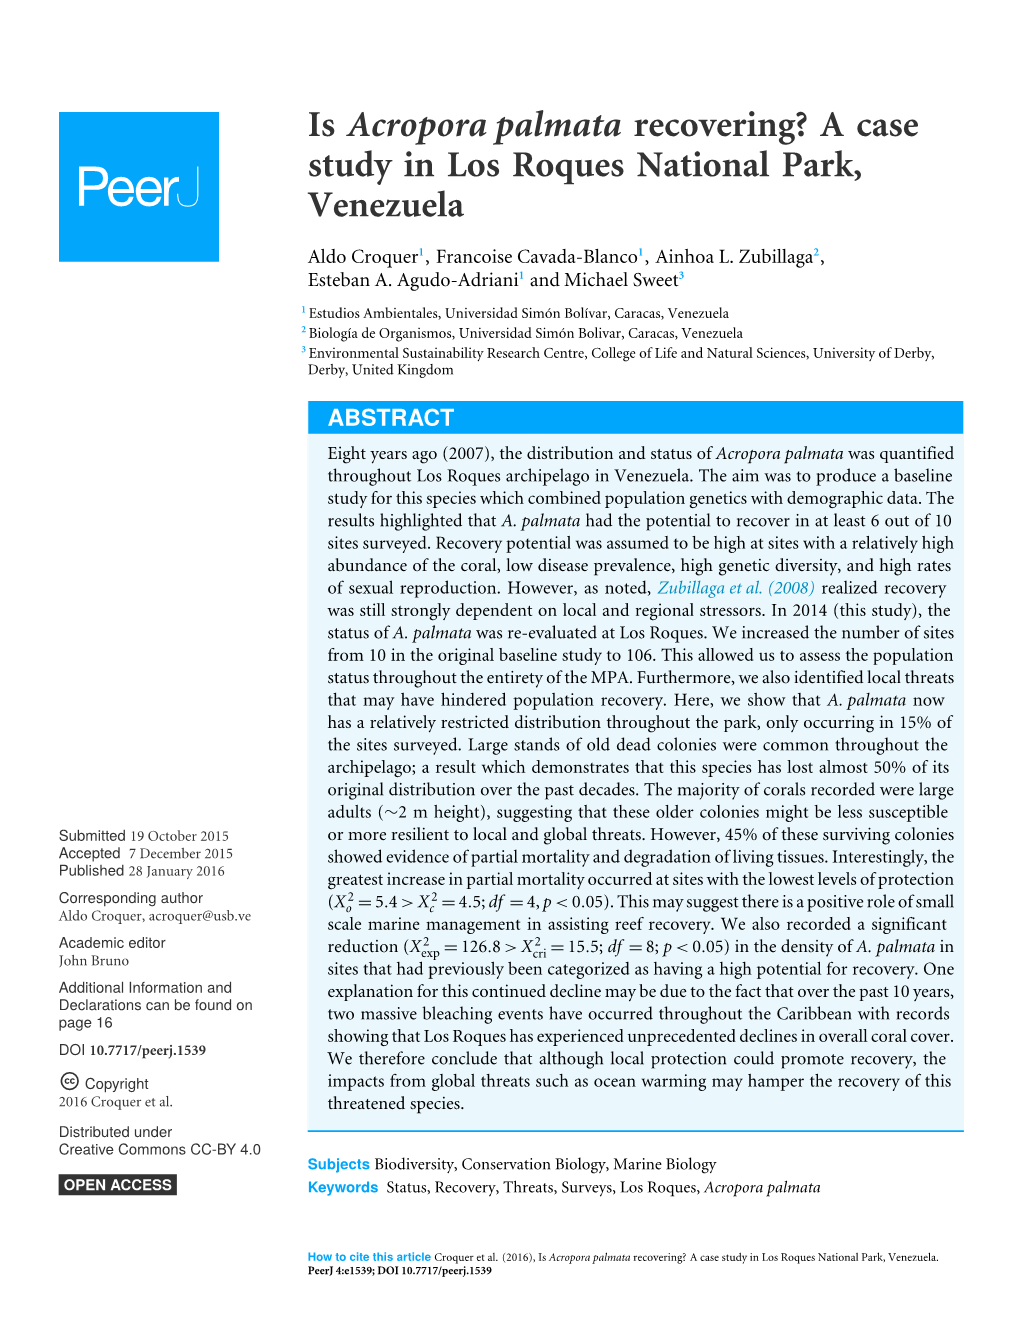 Is Acropora Palmata Recovering? a Case Study in Los Roques National Park, Venezuela